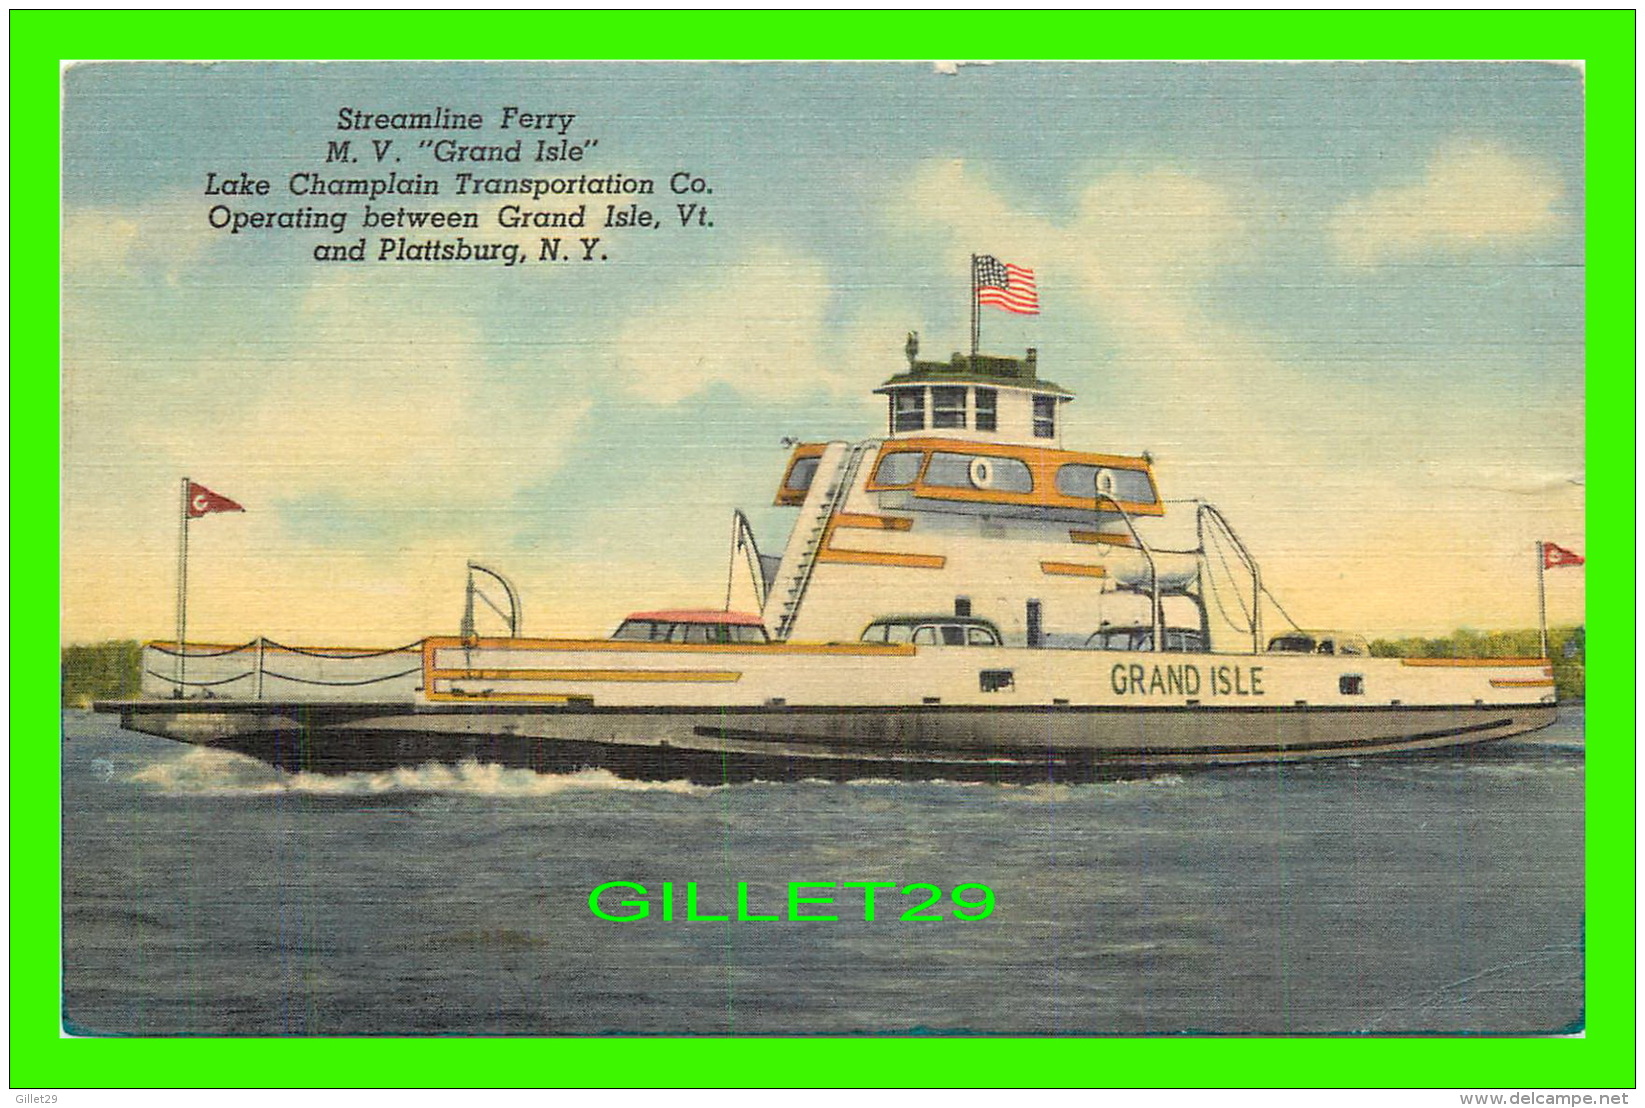 FERRY - M. V. " GRAND ISLE " - LAKE CHAMPLAIN TRANSPORTATION CO - TRAVEL IN 1956 - VERMONT PAPER CO INC - - Ferries